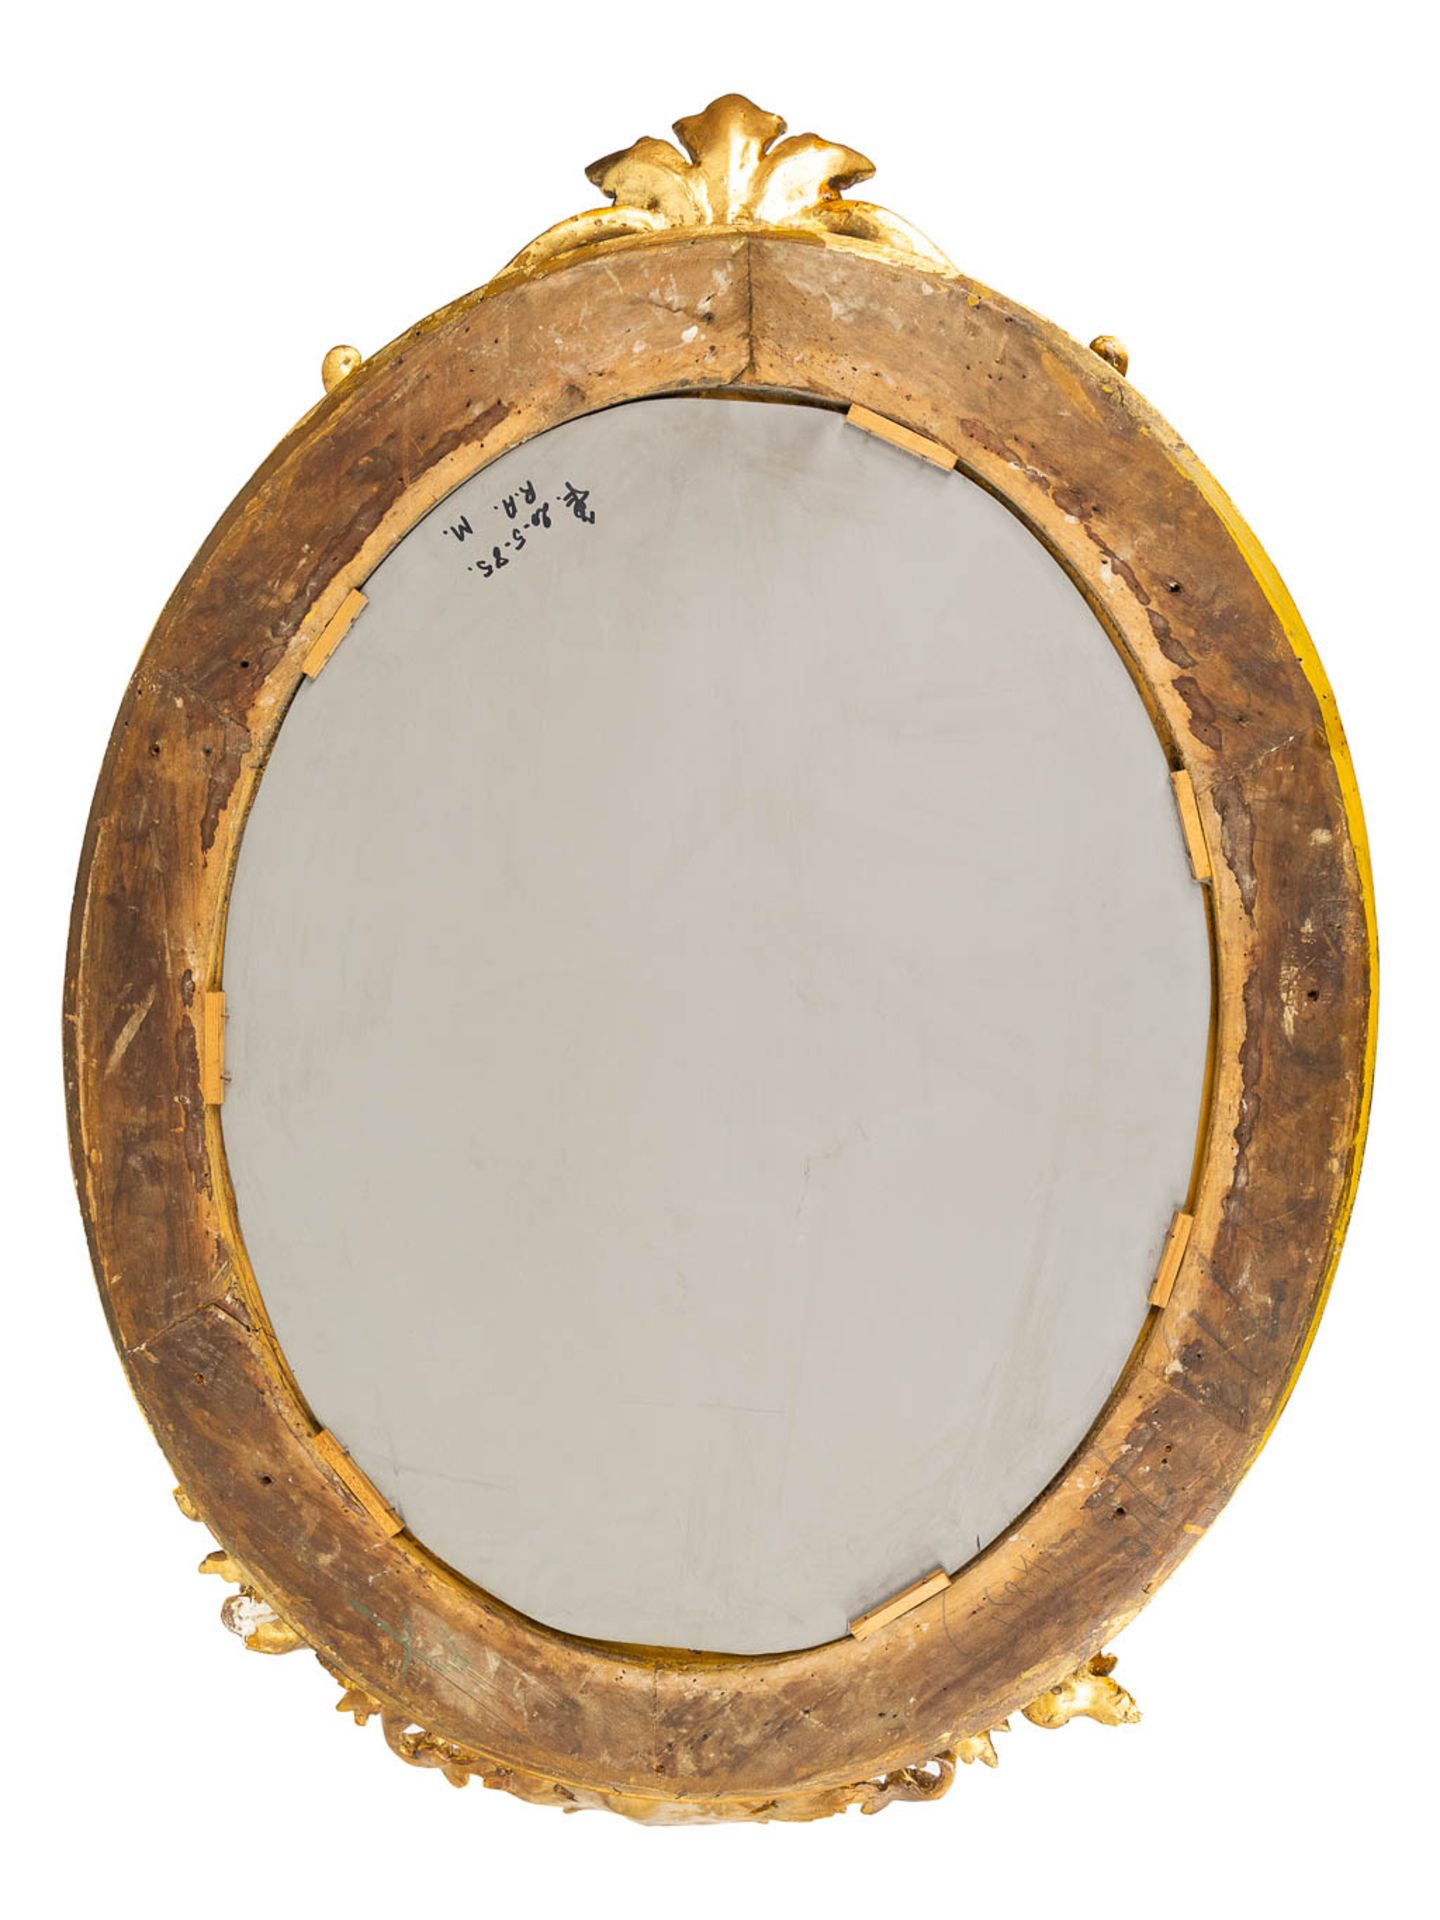 An antique mirror, gilt in a Louis XV style. 19th C. (W:89 x H:126 cm) - Image 8 of 8